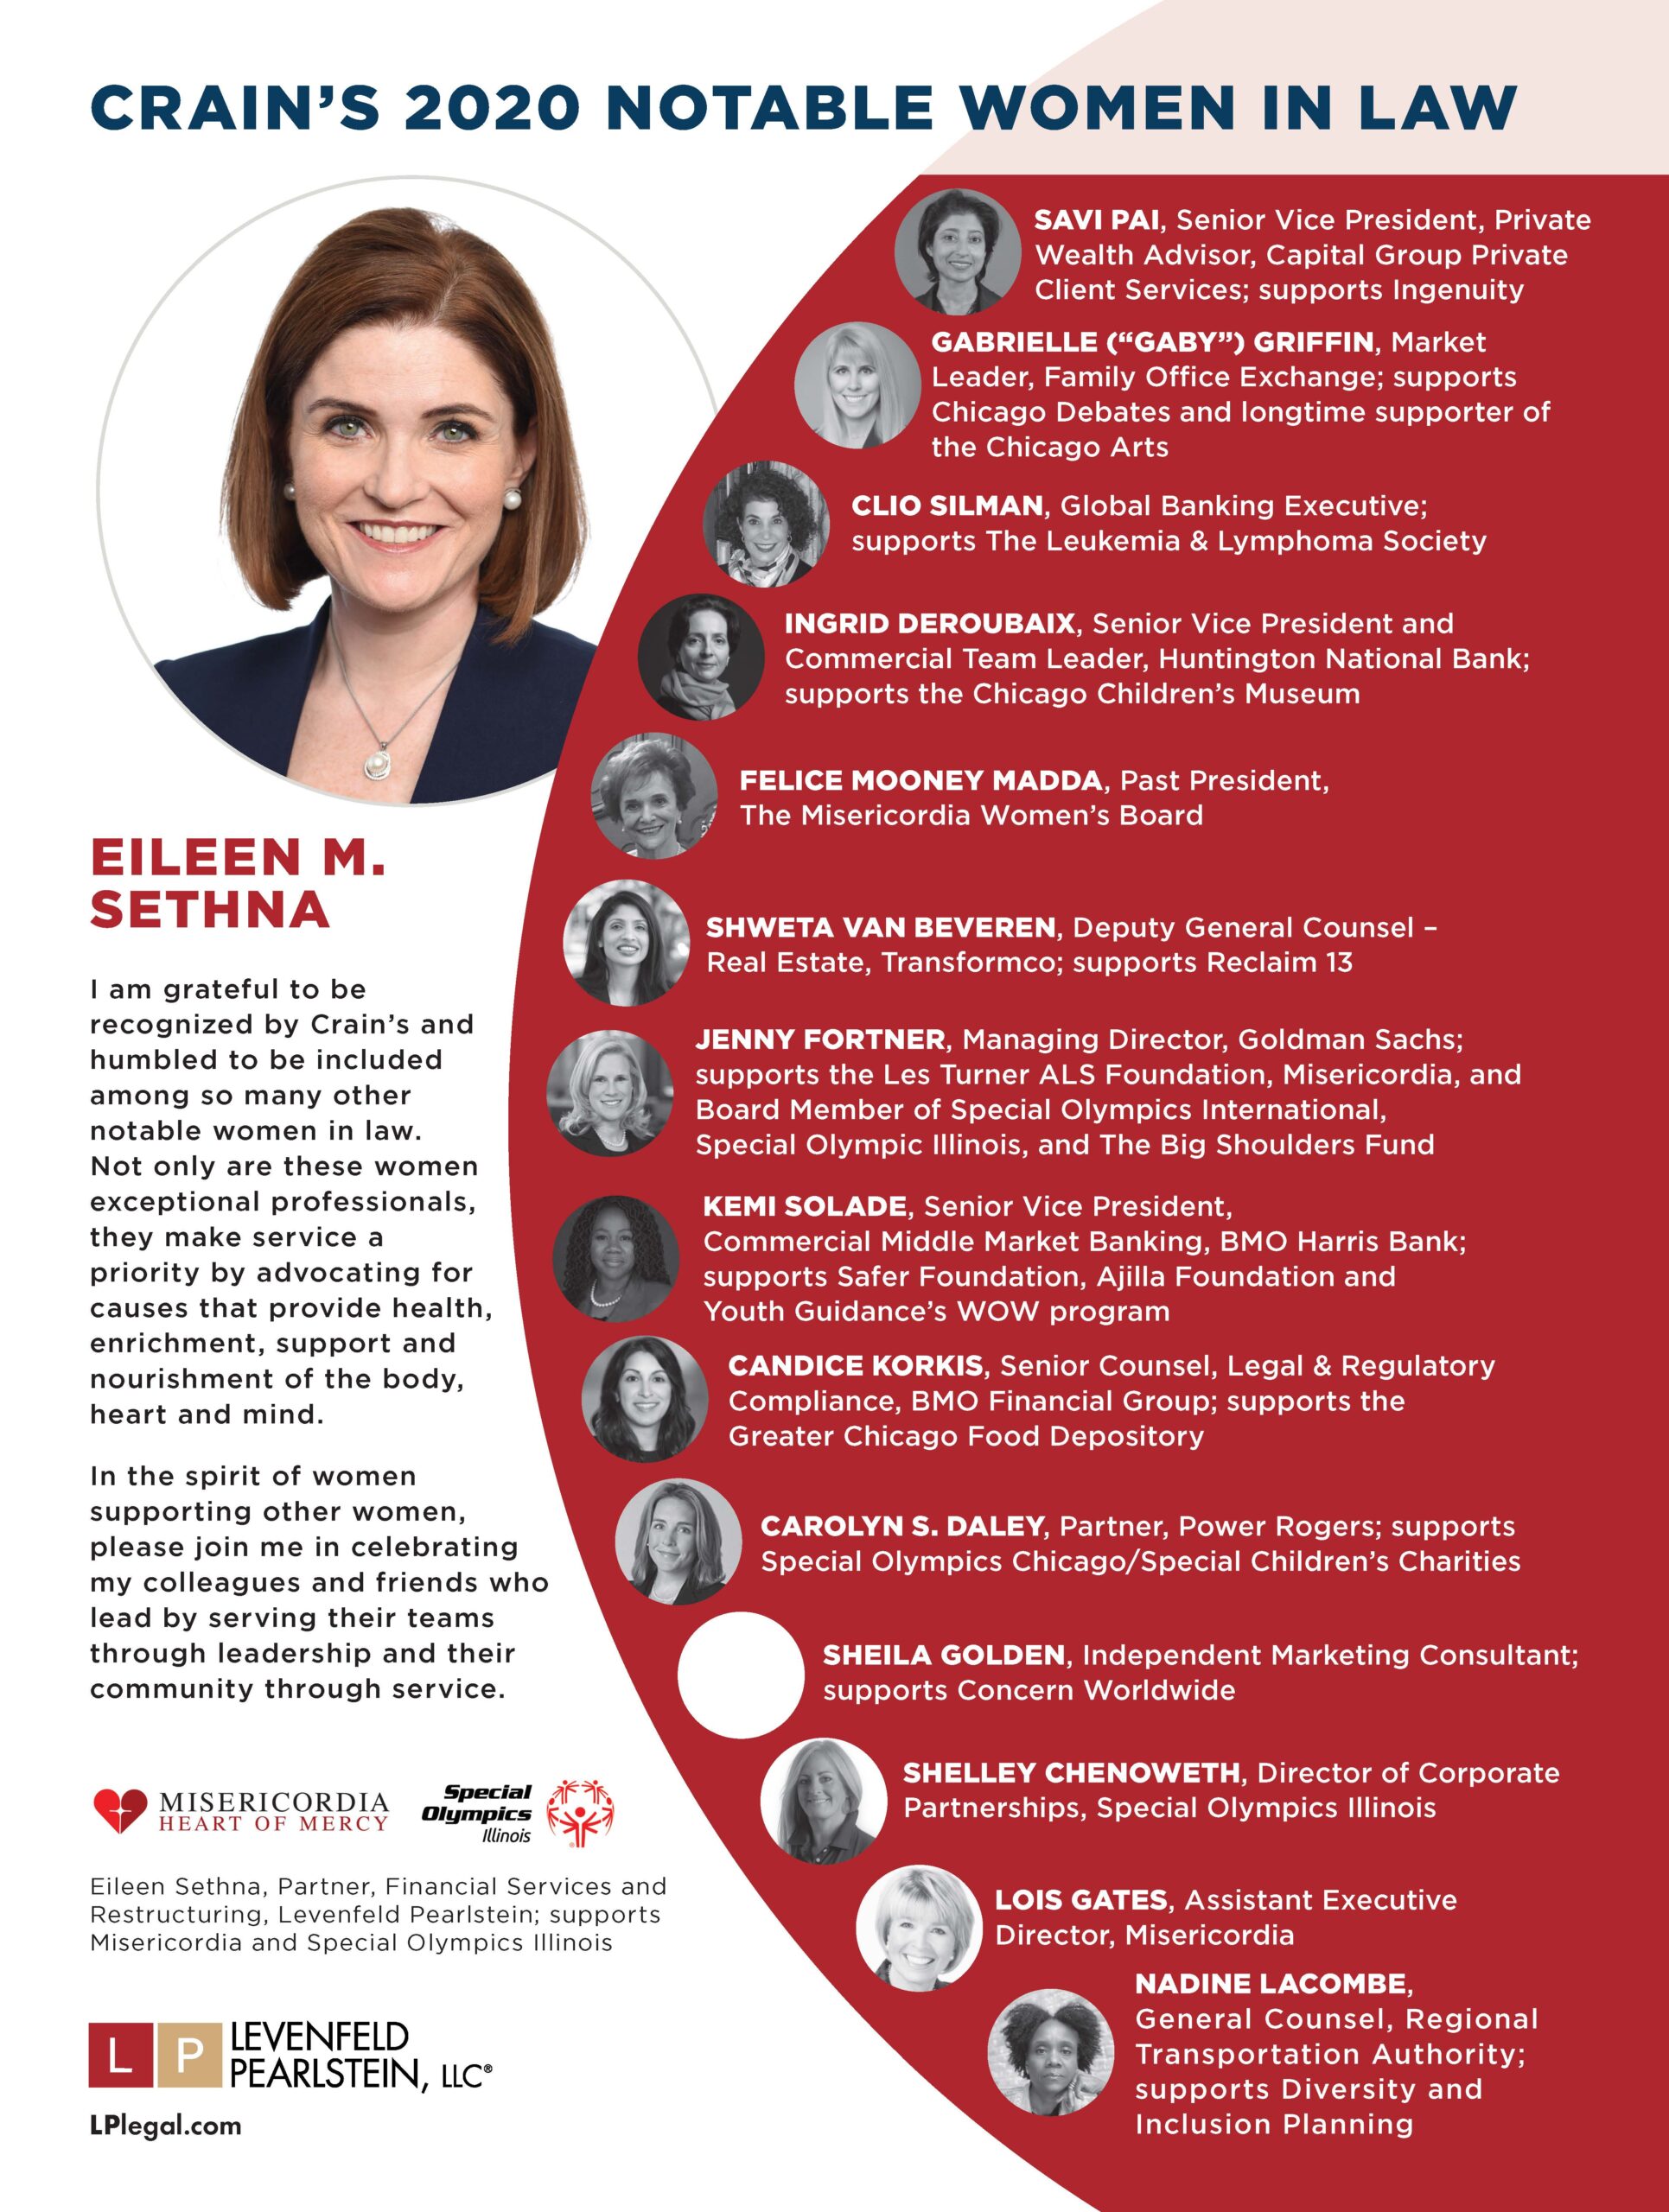 Crain’s Chicago Business Recognizes LP Partner, Eileen Sethna Among 2020 Notable Women in Law